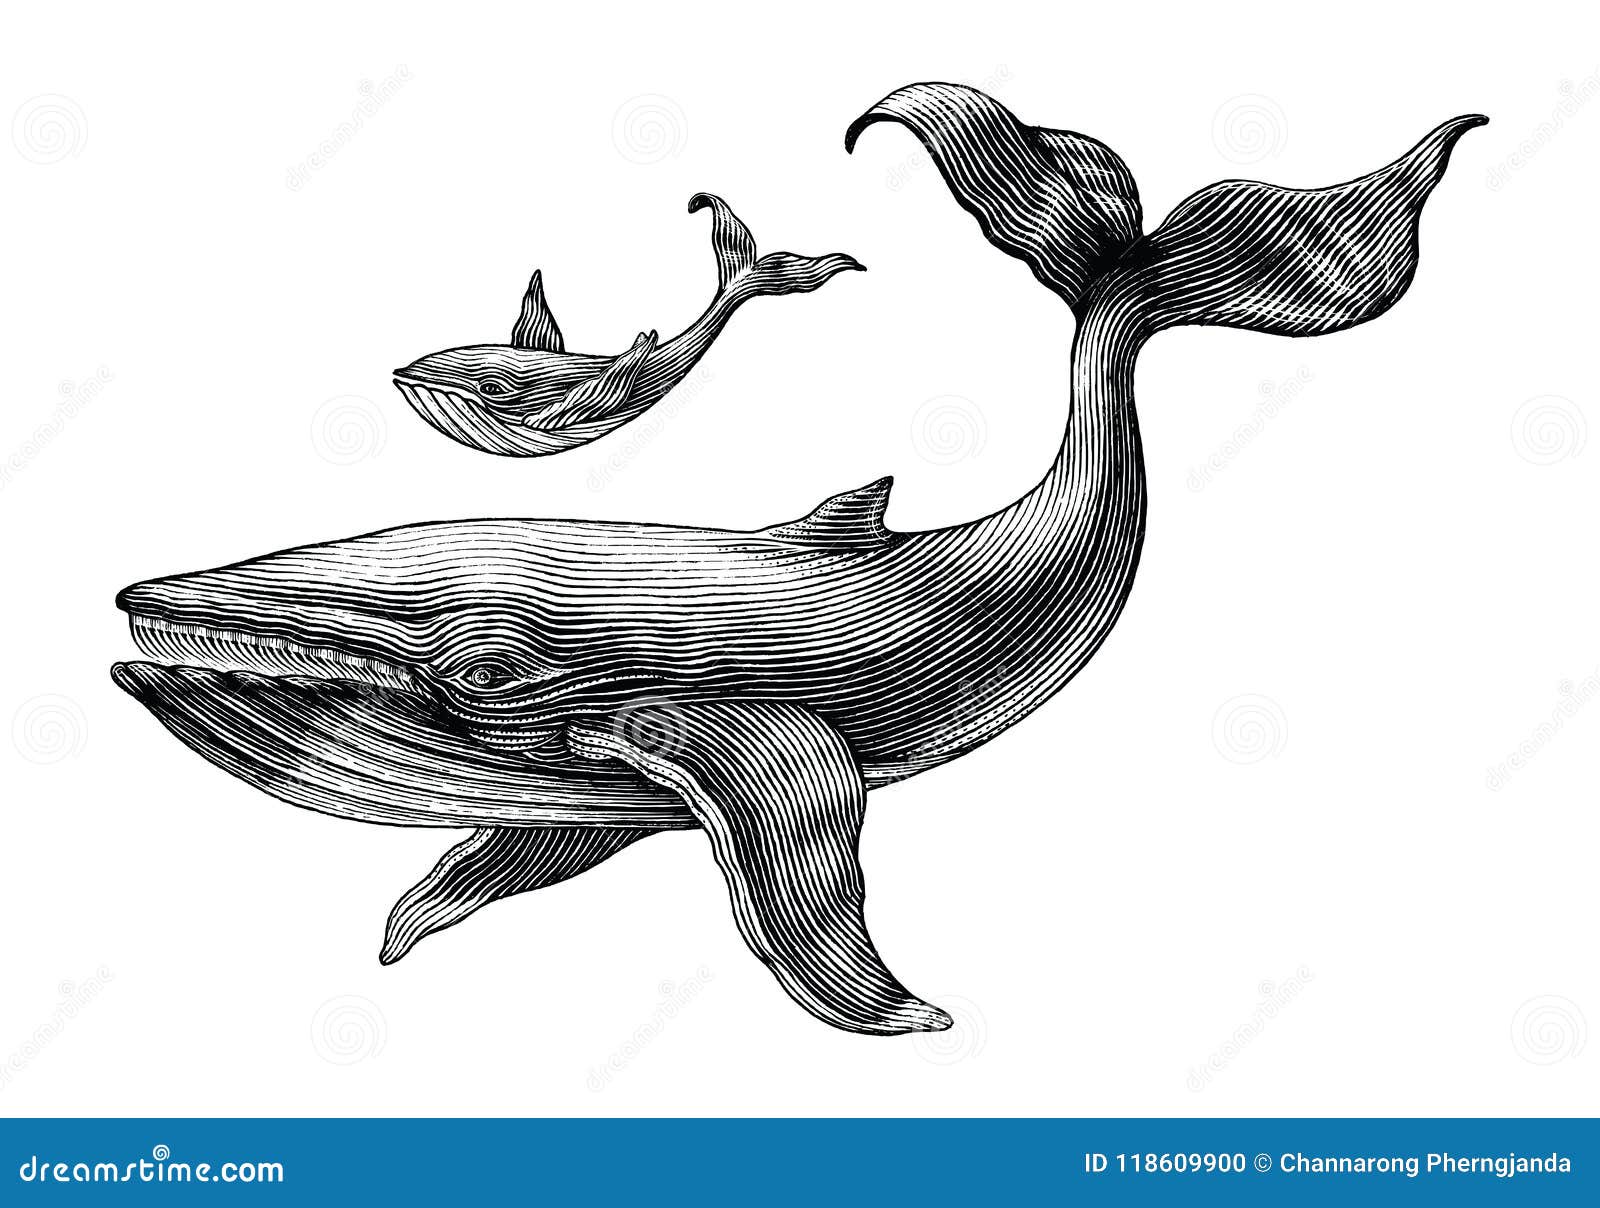 big whale and little whale hand drawing vintage engraving 